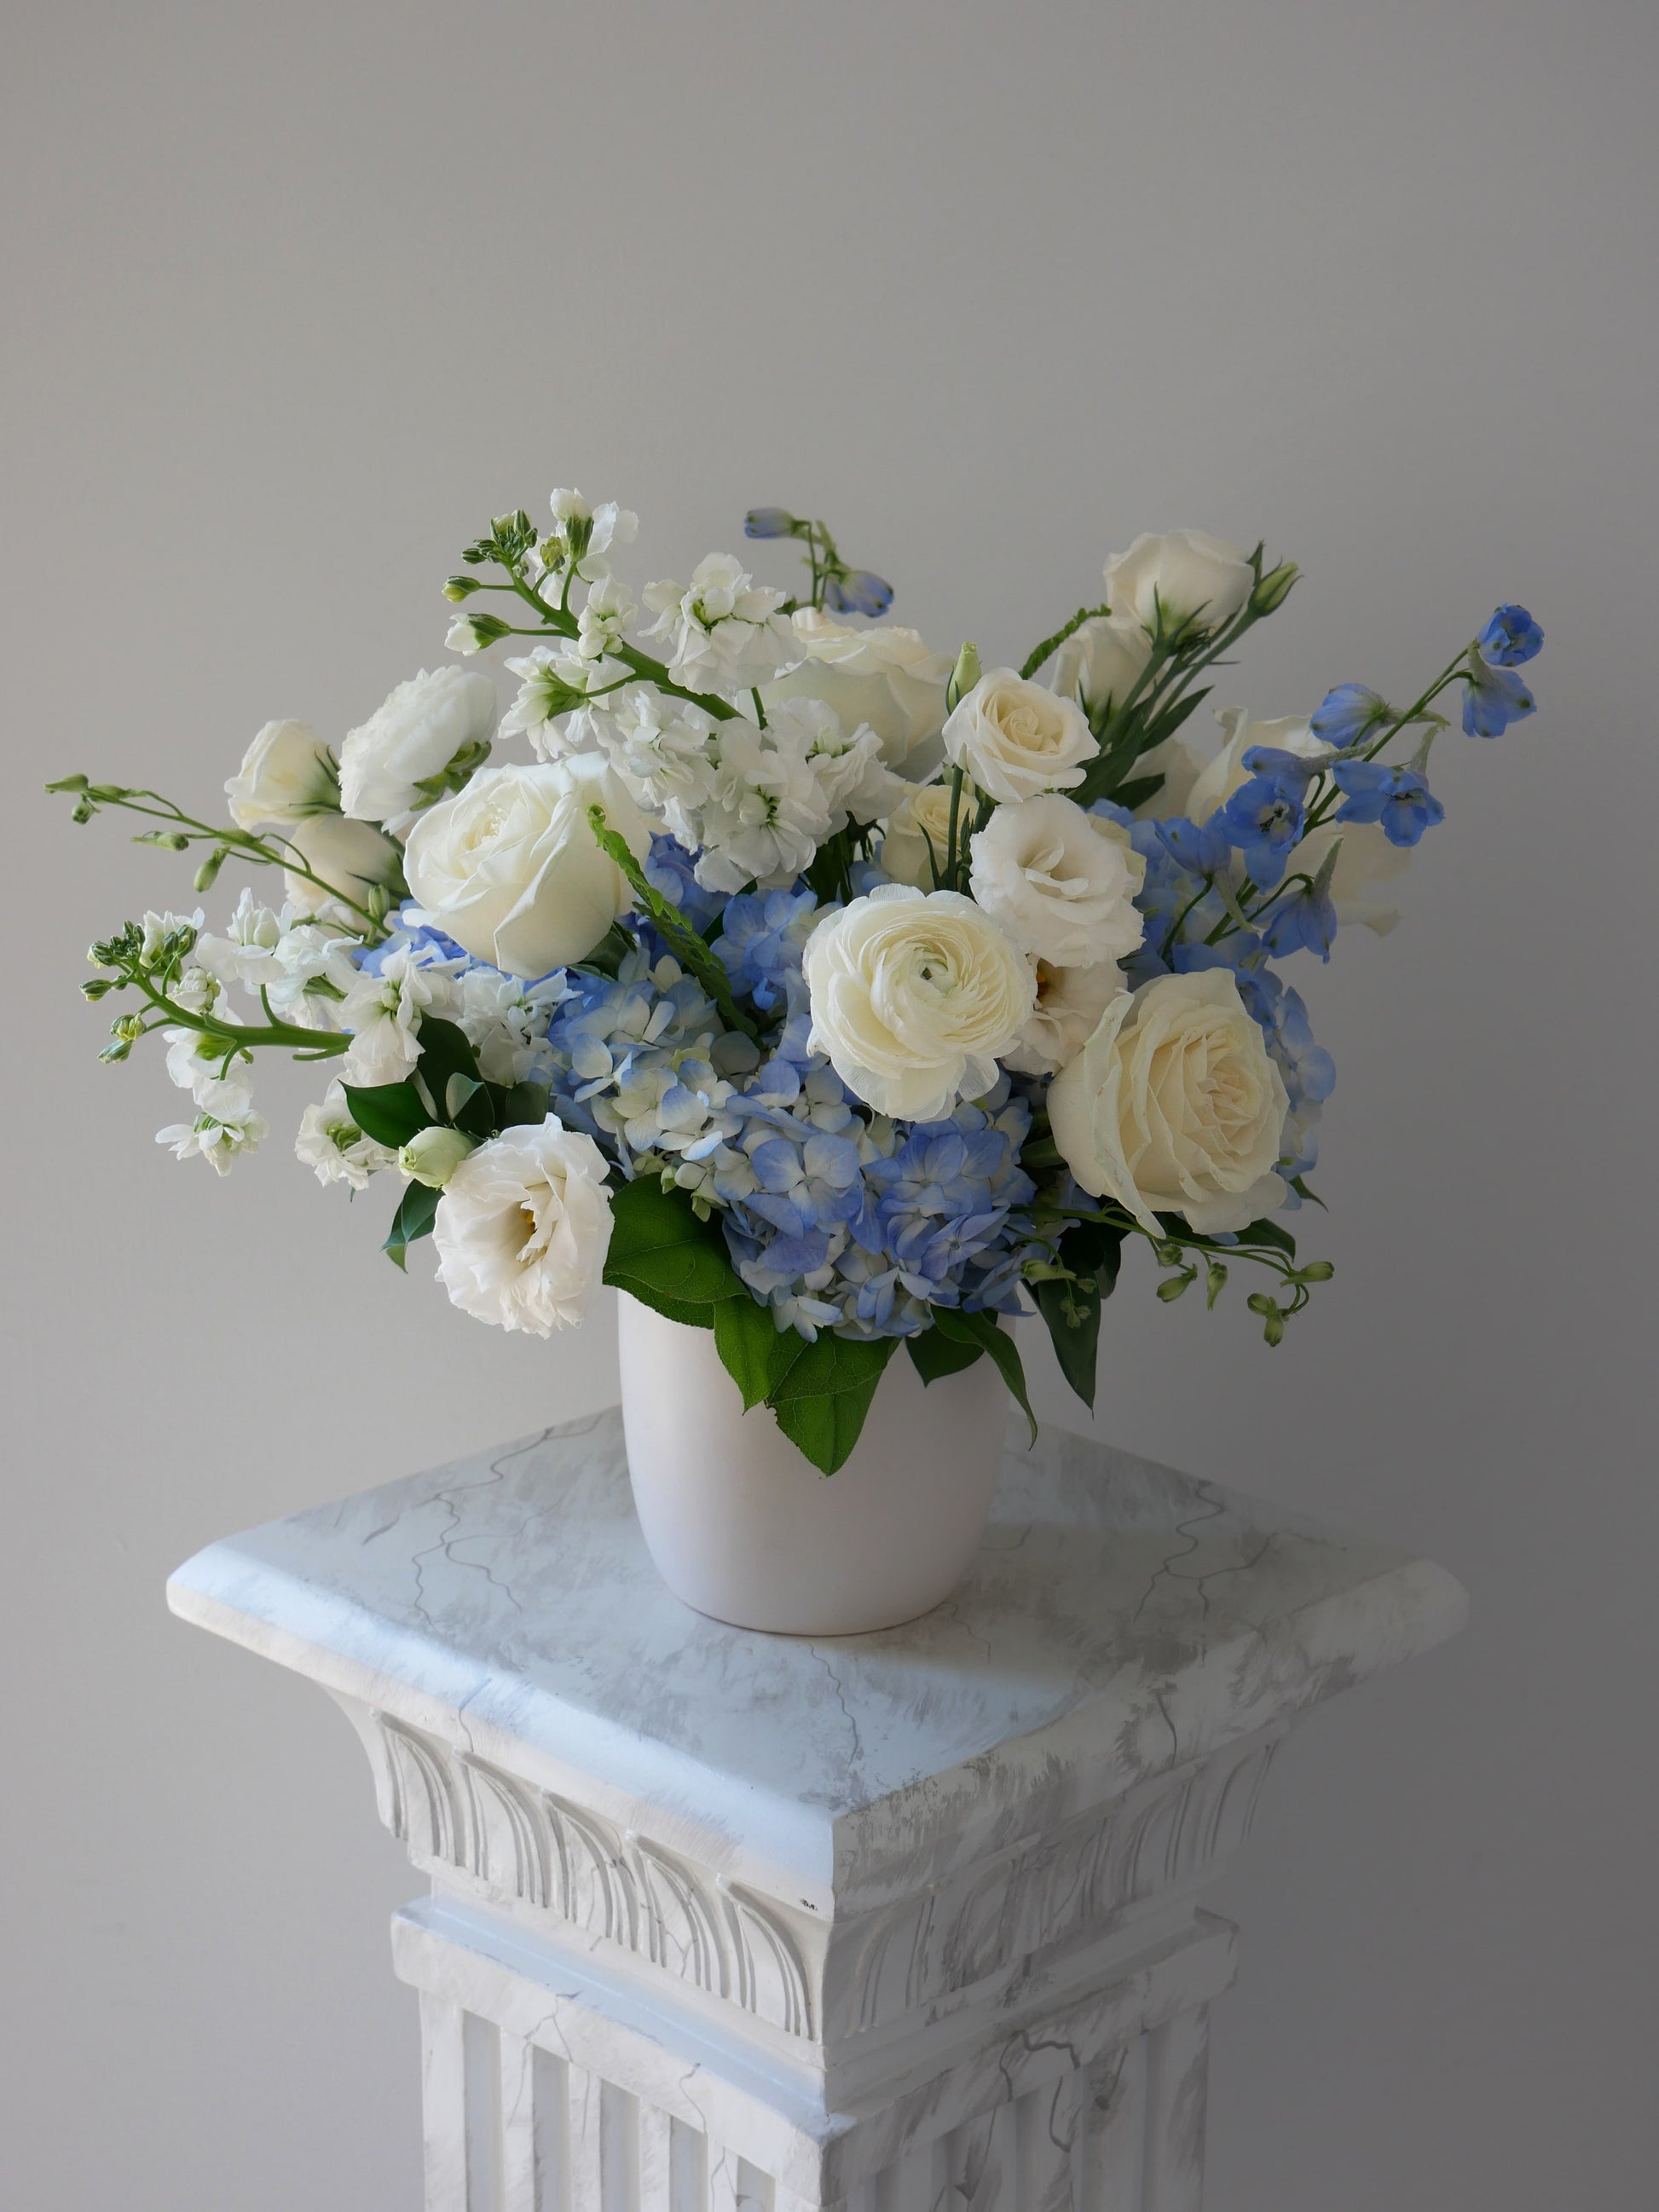 Deluxe size white and blue flower arrangement in low white cylinder featuring hydrangea, ranunculus, roses, delphinium, lizianthus, rich greens and more